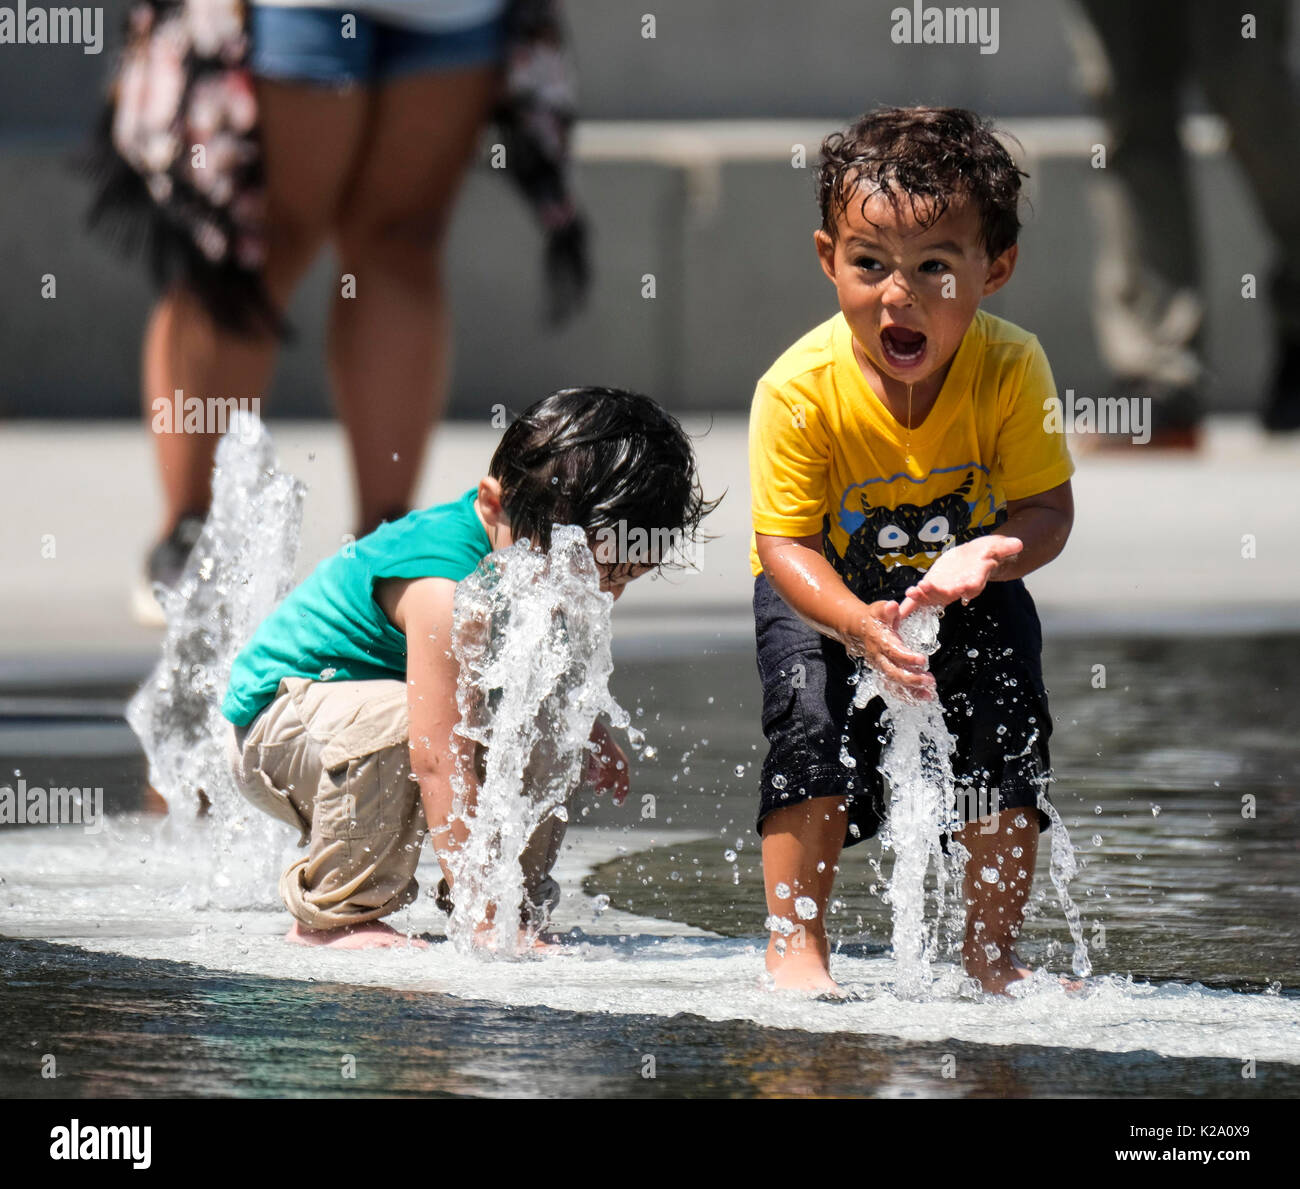 Los Angeles, USA. 29th Aug, 2017. Children play with water at the Grand Park fountain on Aug. 29, 2017 in Los Angeles, the United States. A heat wave hit south California on Tuesday, raising the highest temperature to more than 37 degrees Celsius in many areas. Credit: Zhao Hanrong/Xinhua/Alamy Live News Stock Photo